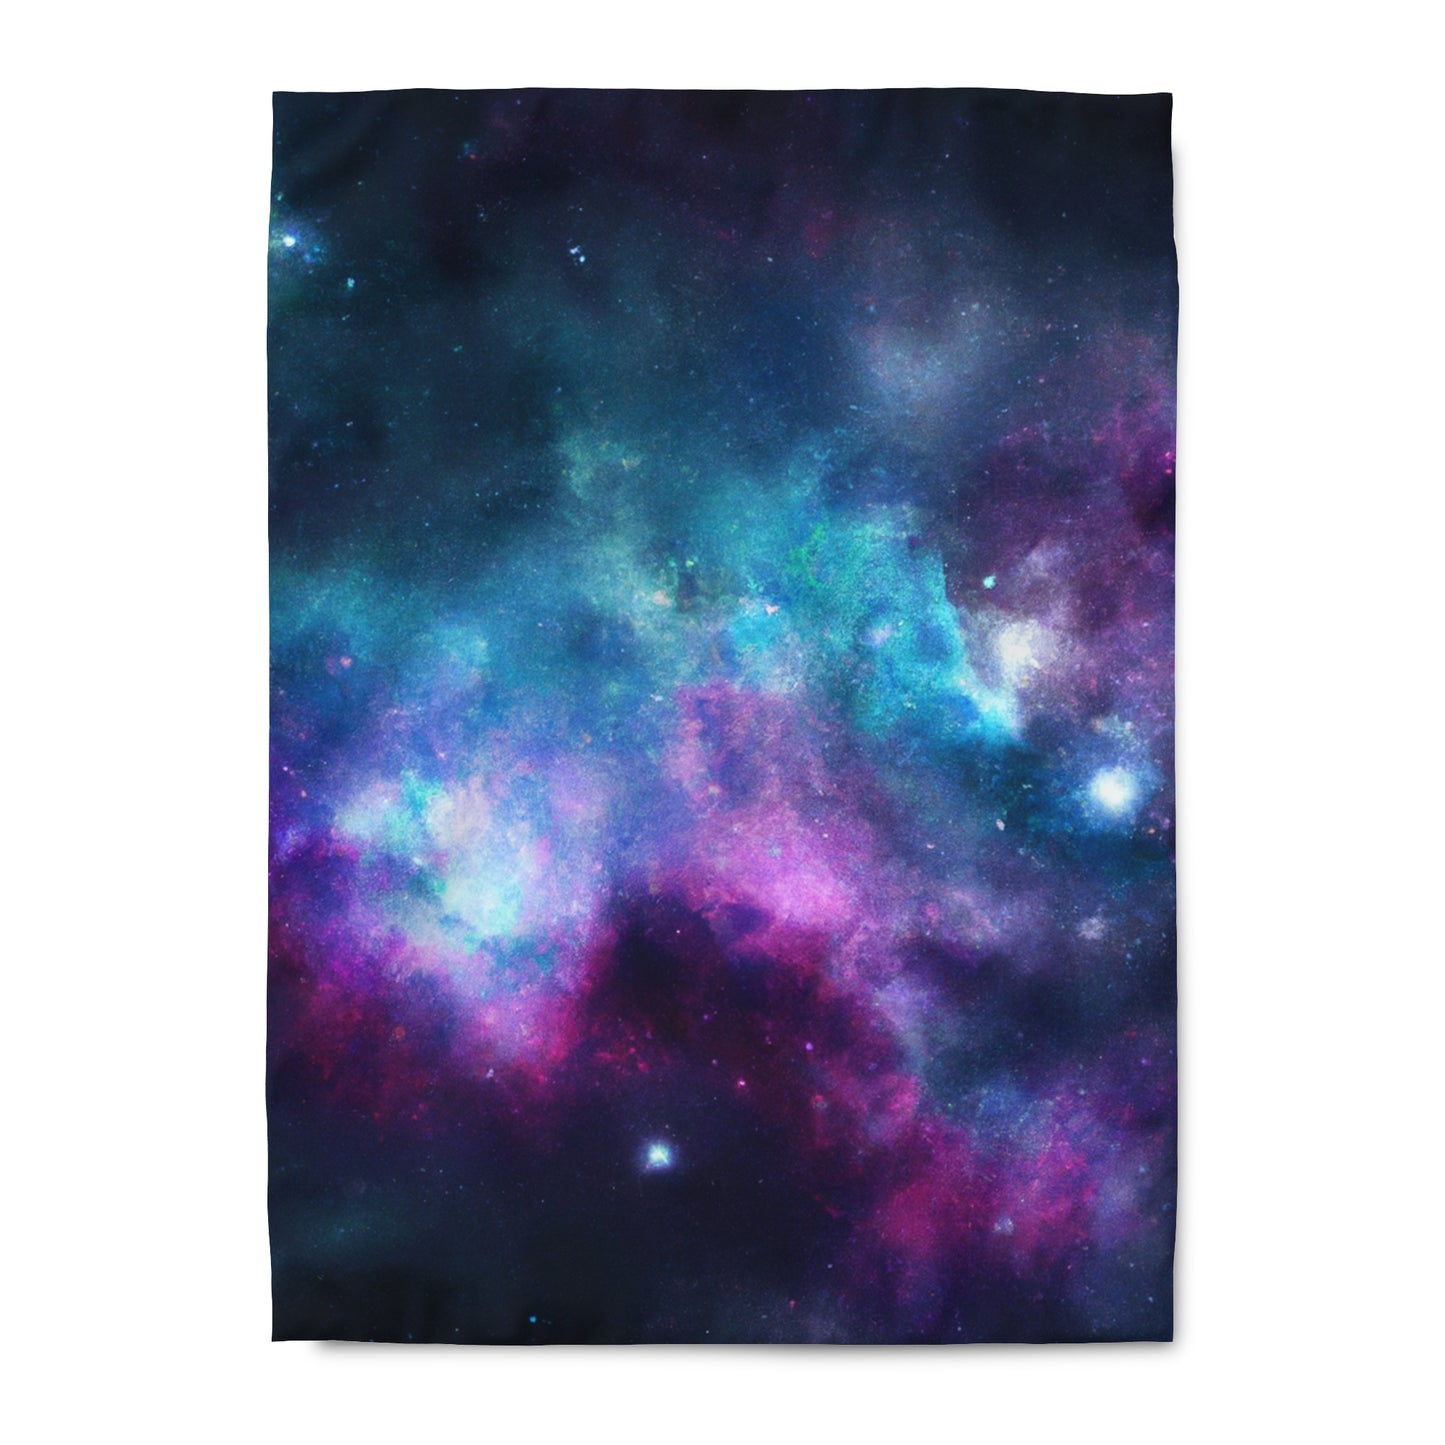 Sunny Dreams of A Starry Night - Astronomy Duvet Bed Cover